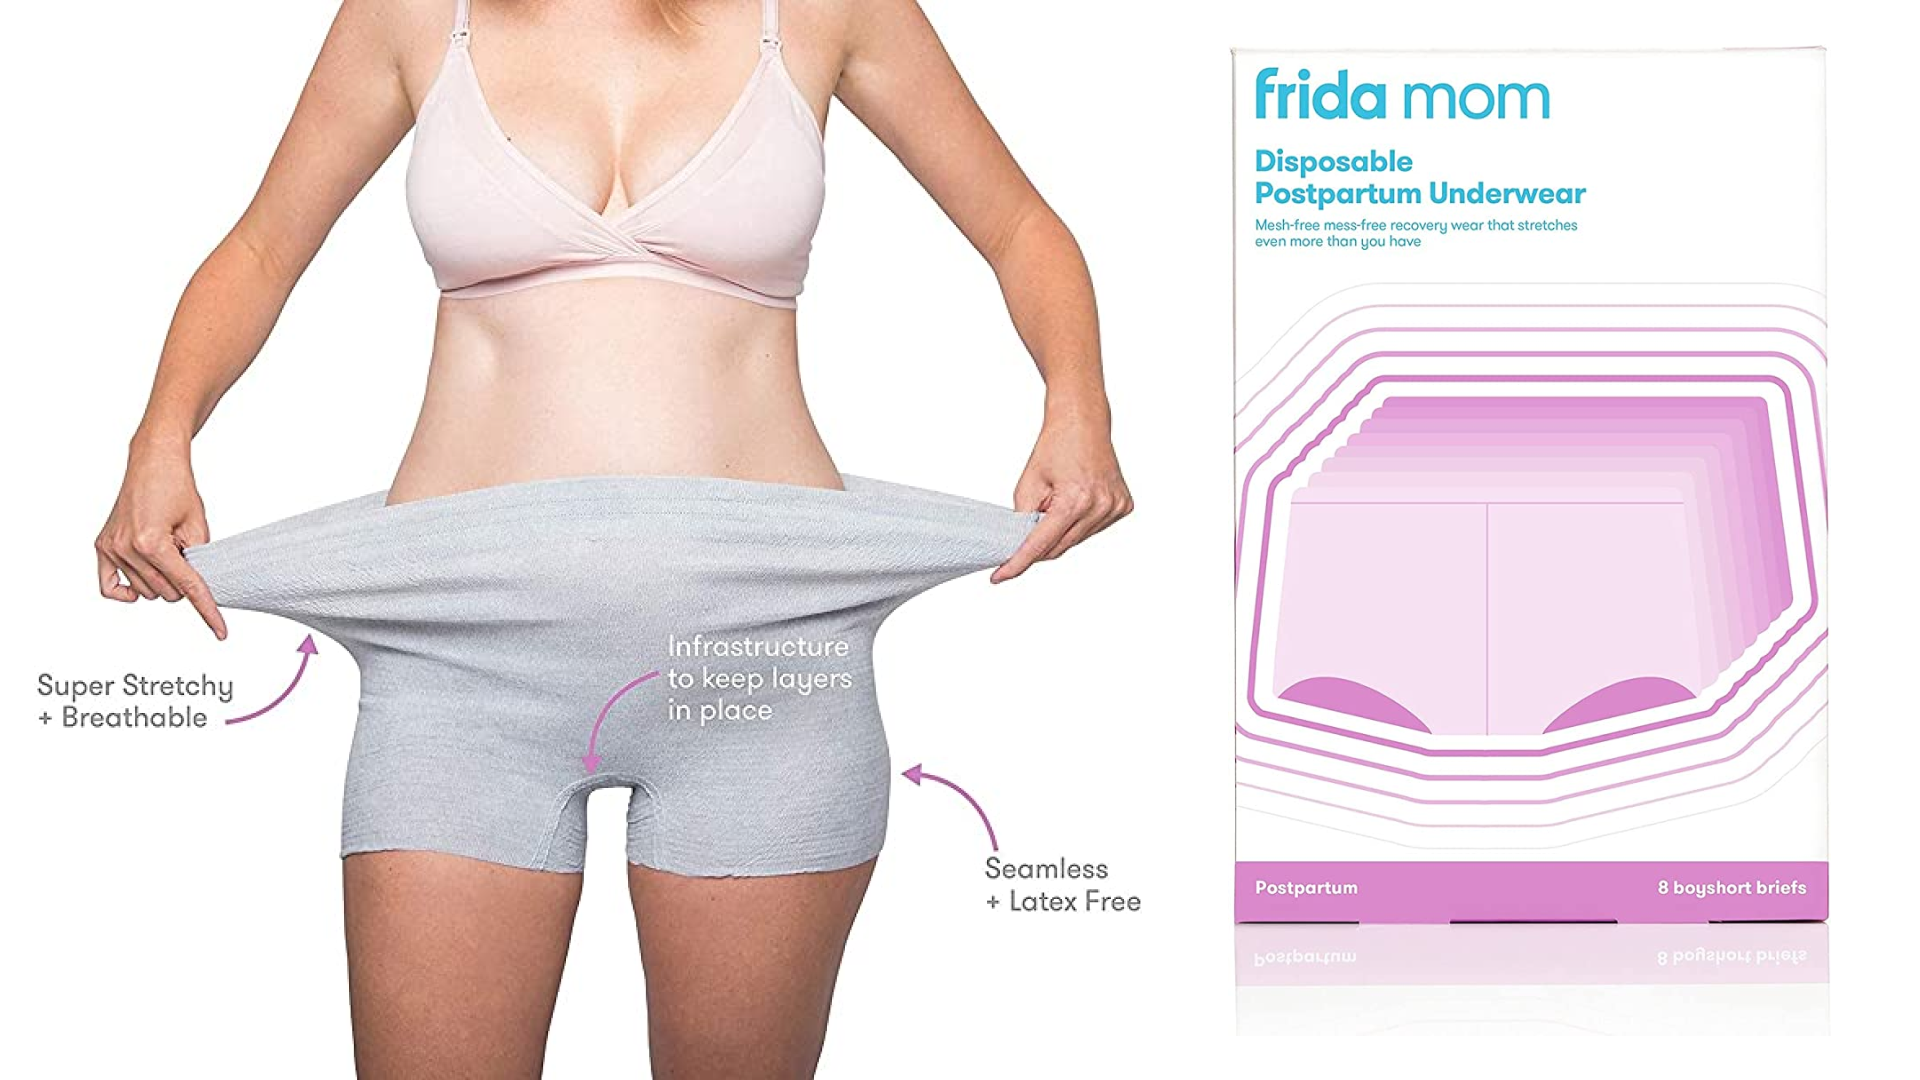 Postpartum Disposable Underwear by Party Panties